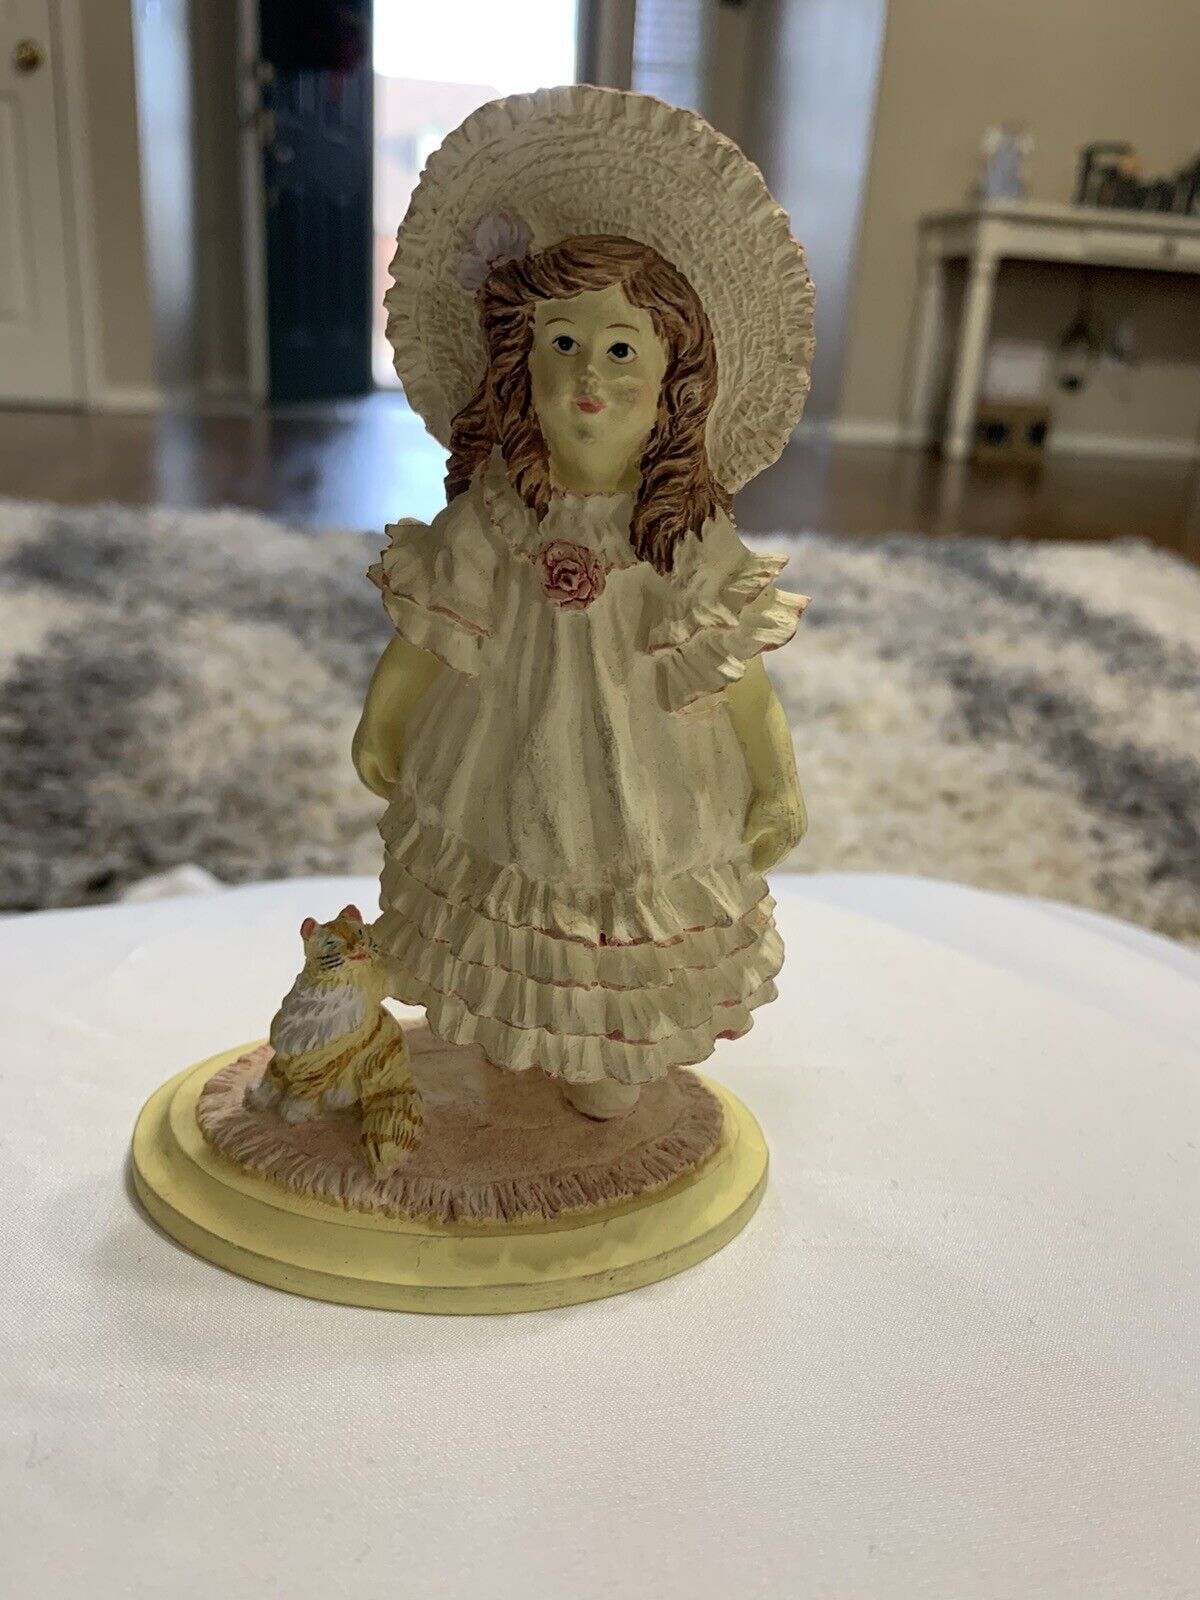 Dolly dreams “First Party” Figurine DD5003 Limited Edition By Betty Chaisson